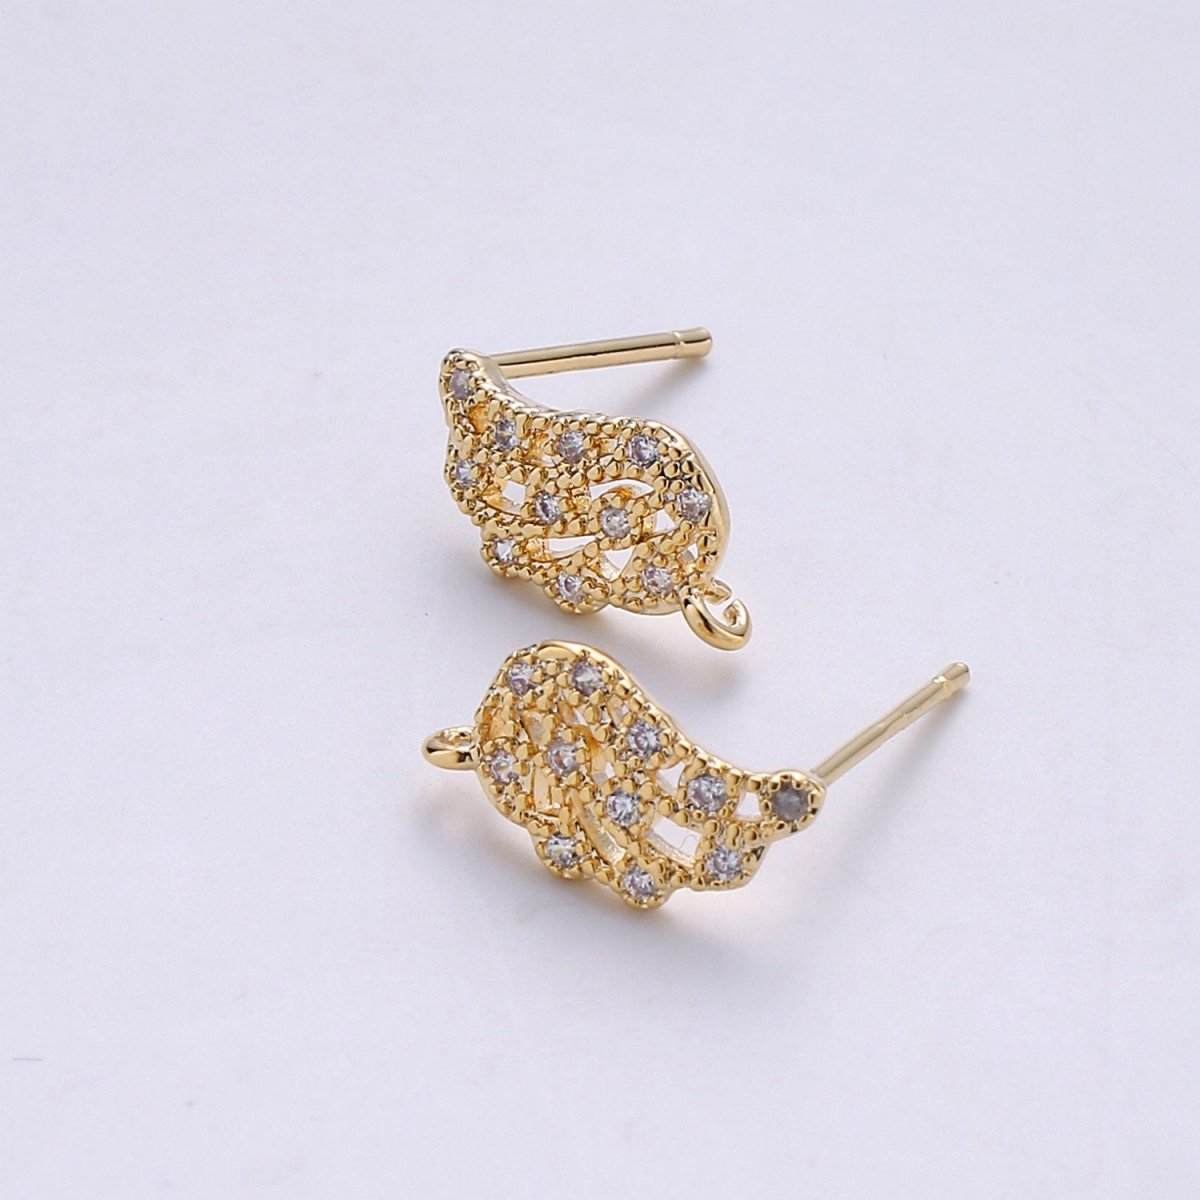 Wing Stud Earring Charm • 24k Gold Filled• Micro Pave angel wing • Jewelry Making Supplies • Open Link for Jewelry Making Supply K-411 PAIR - DLUXCA